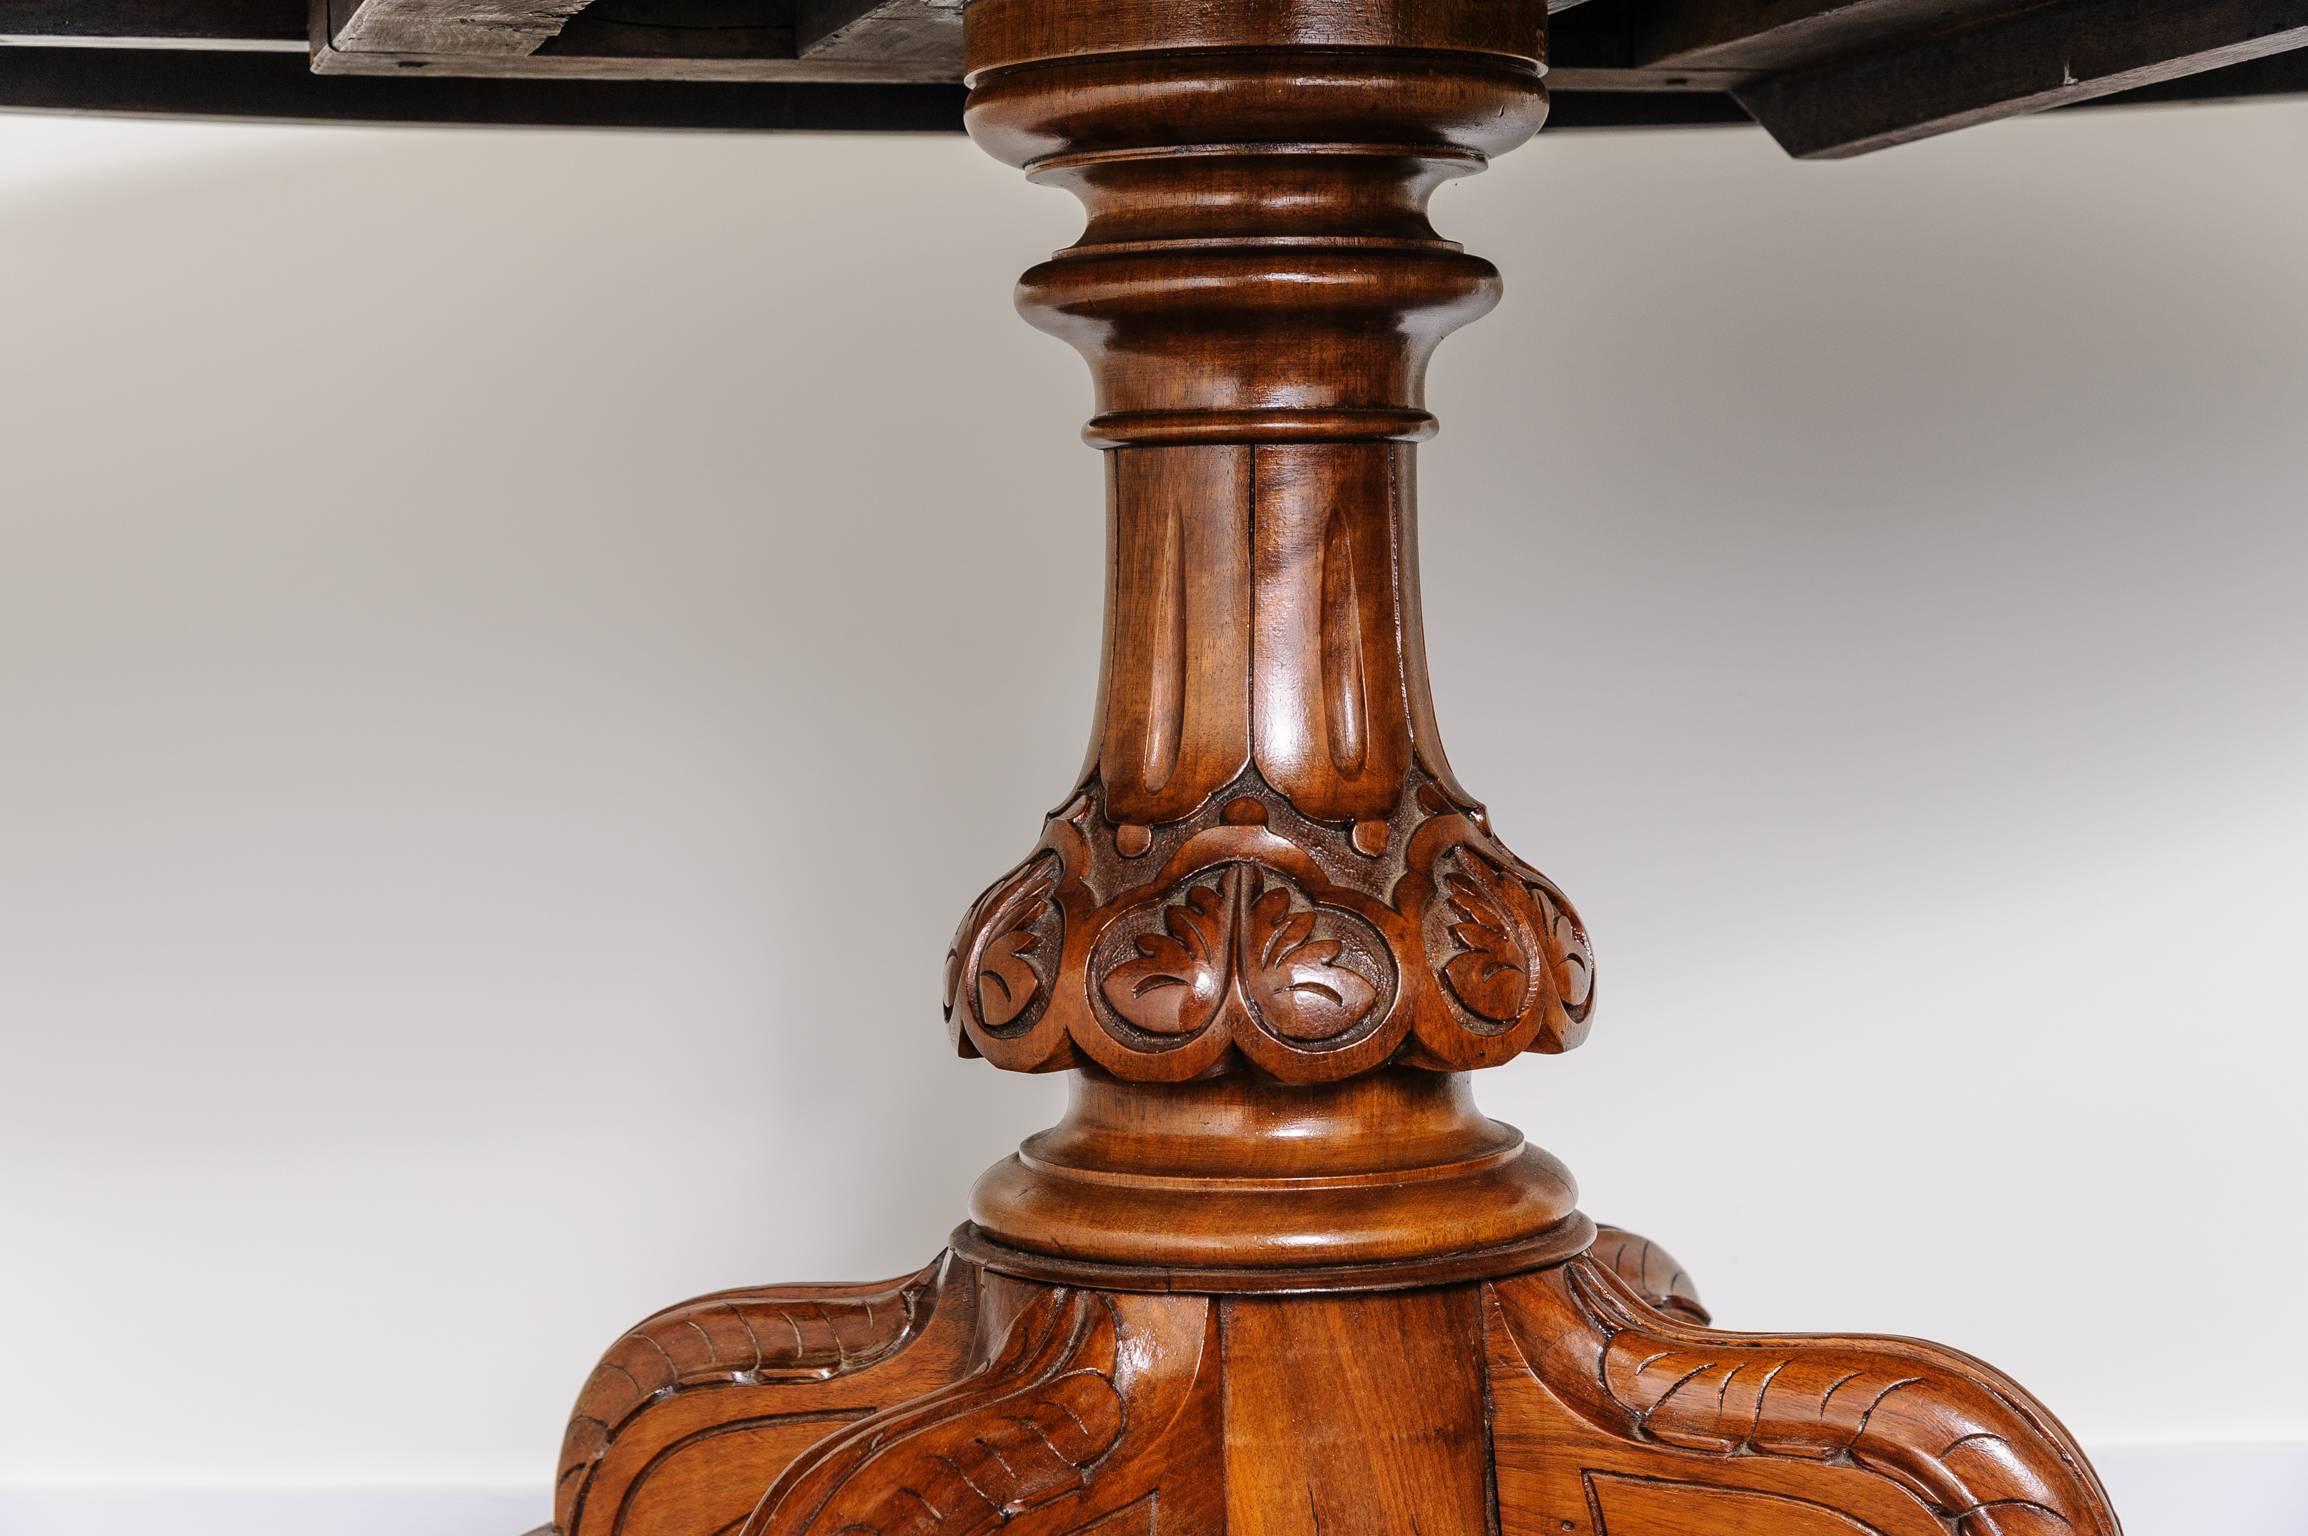 English 19th Century Edwardian Oval Center Table, Walnut and Burl Wood, Marquetry Inlay